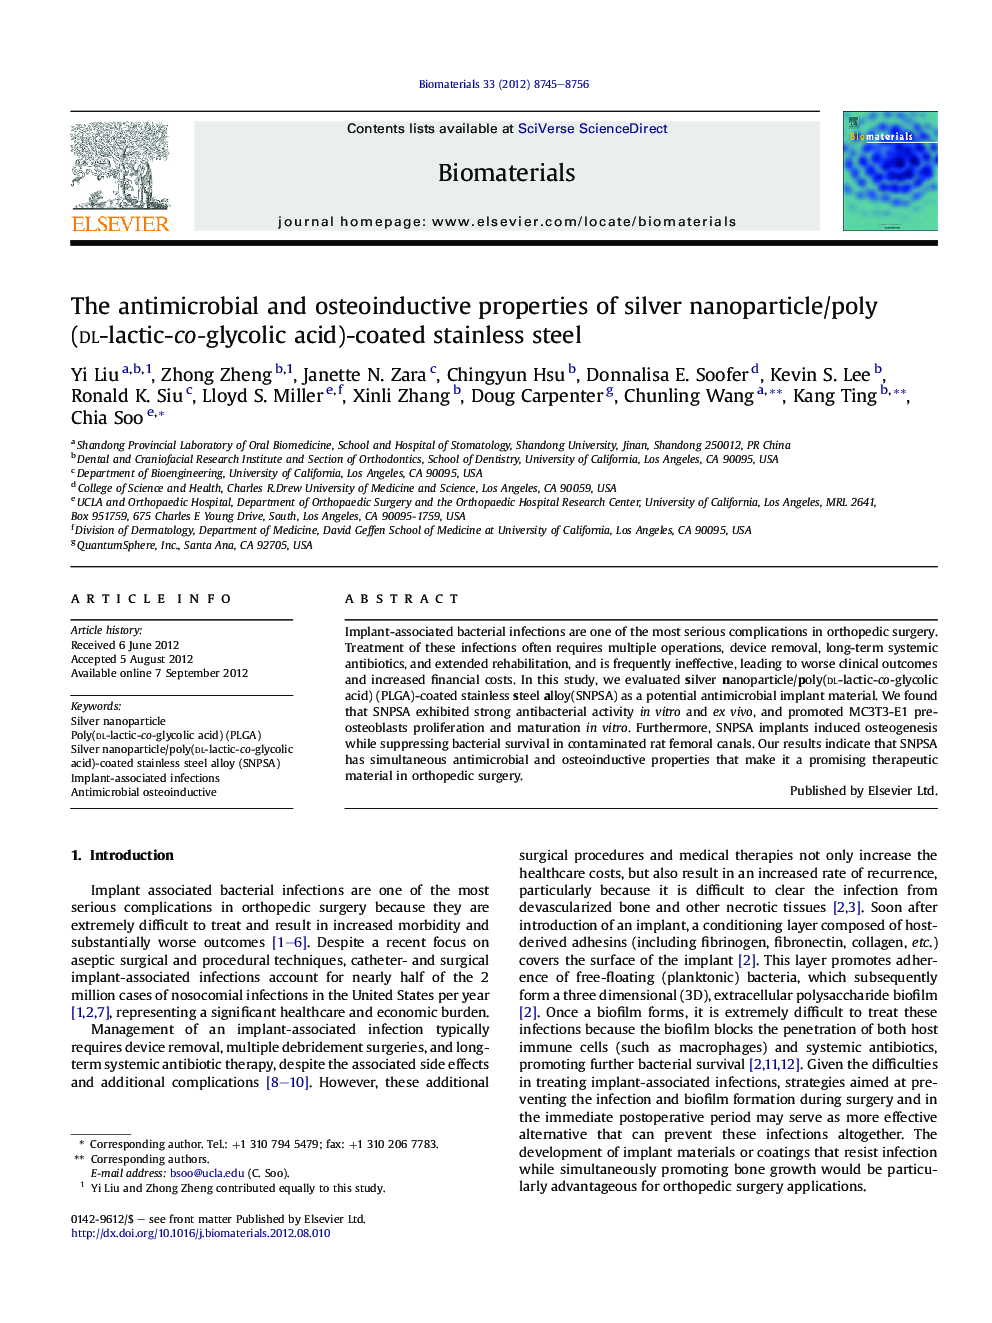 The antimicrobial and osteoinductive properties of silver nanoparticle/poly (dl-lactic-co-glycolic acid)-coated stainless steel